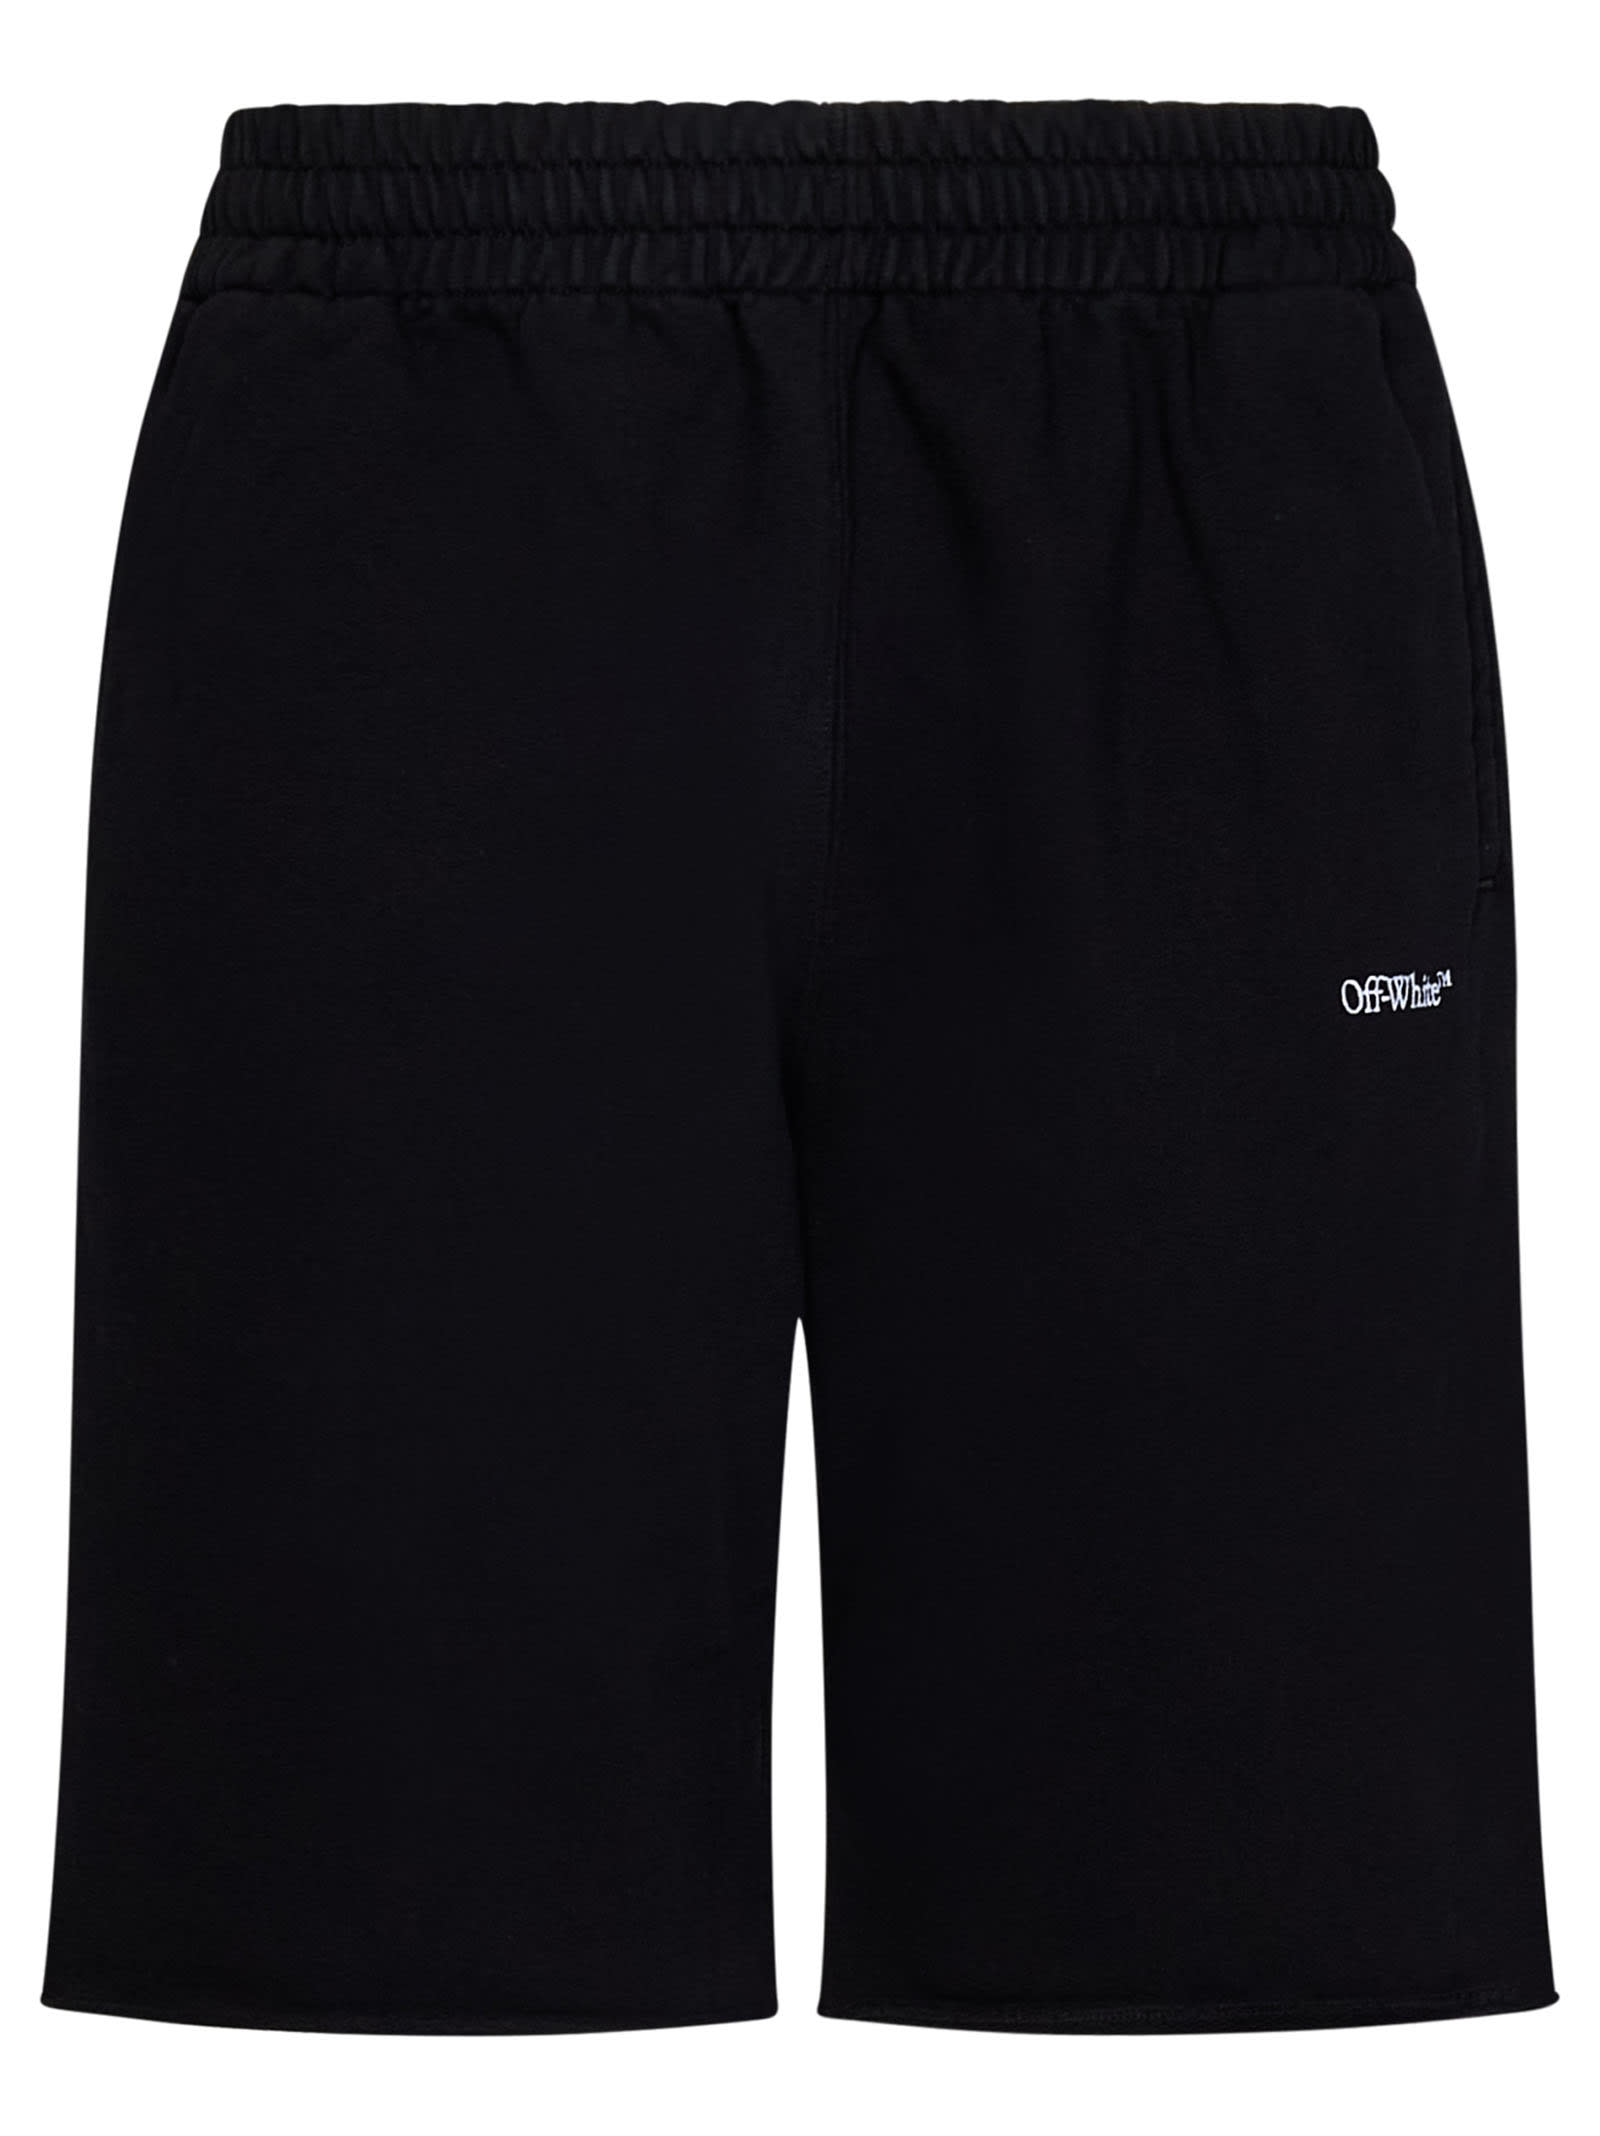 OFF-WHITE SCRIBBLE DIAG SHORTS